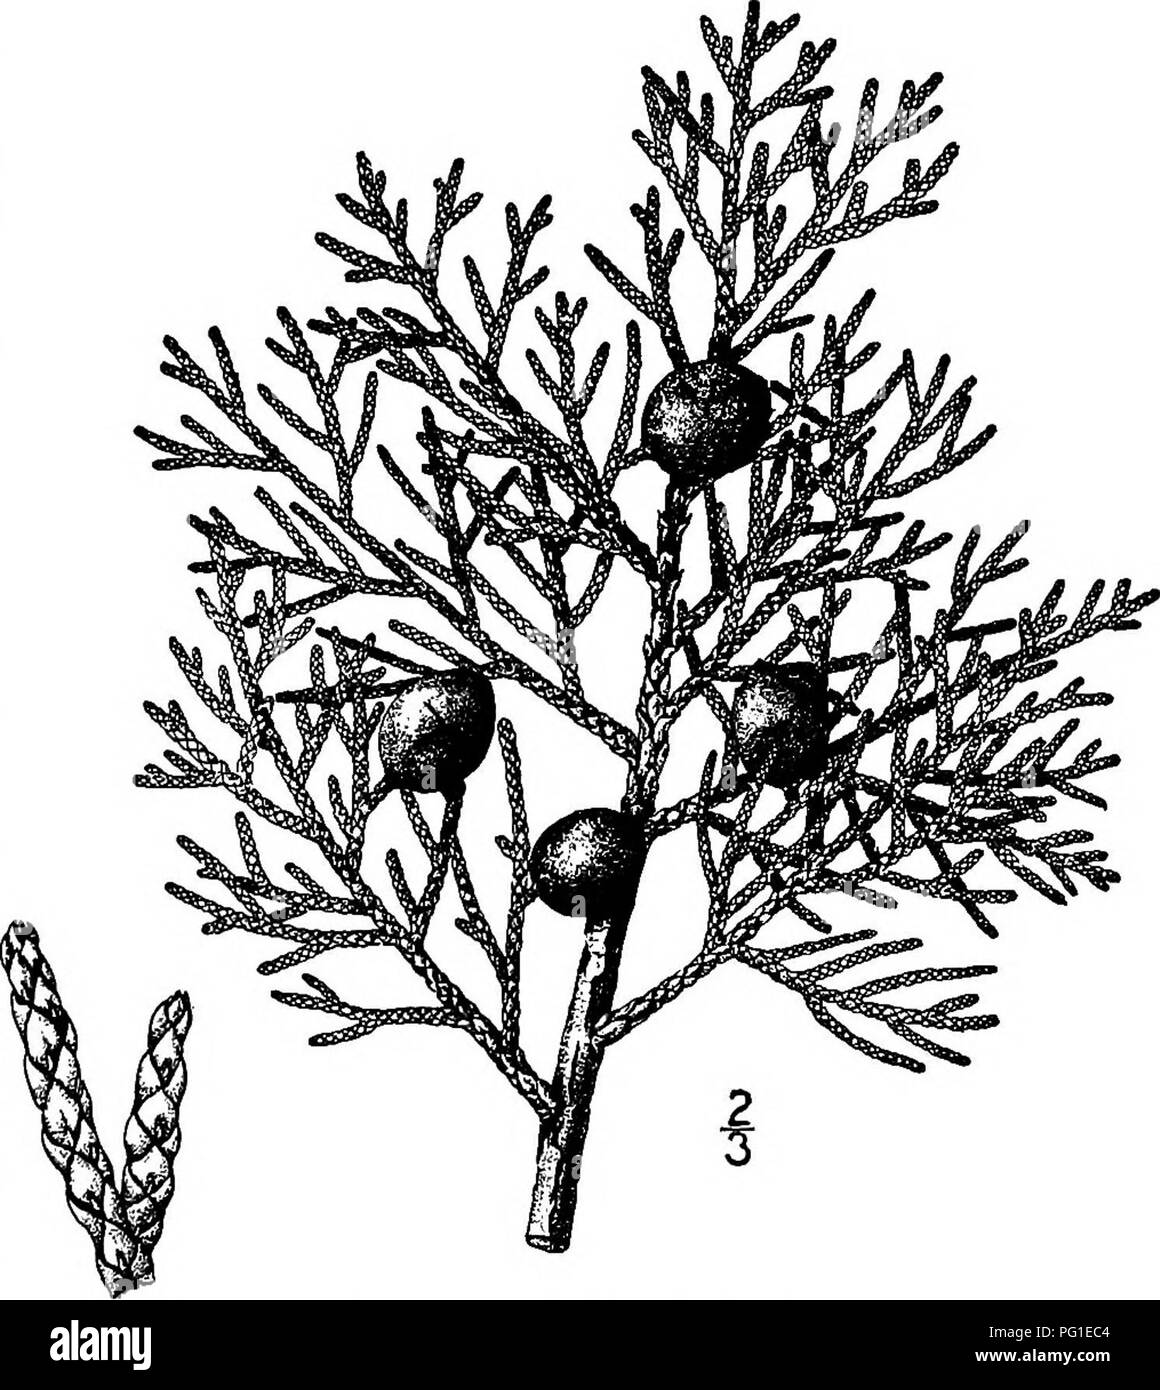 . North American trees : being descriptions and illustrations of the trees growing independently of cultivation in North America, north of Mexico and the West Indies . Trees. California Juniper 109 clipping and was a great favorite for hedges, especially when topiary gardening was in vogue. A great many varieties are now in cultivation. The Low Juniper, Juniperus sibirica Burgsdorf, is a low shrub, with stems radiating from a central root, sometimes appearing like a gigantic bird's-nest, with stouter and often shorter leaves which are sometimes curved; it grows on hills in the northern parts o Stock Photo